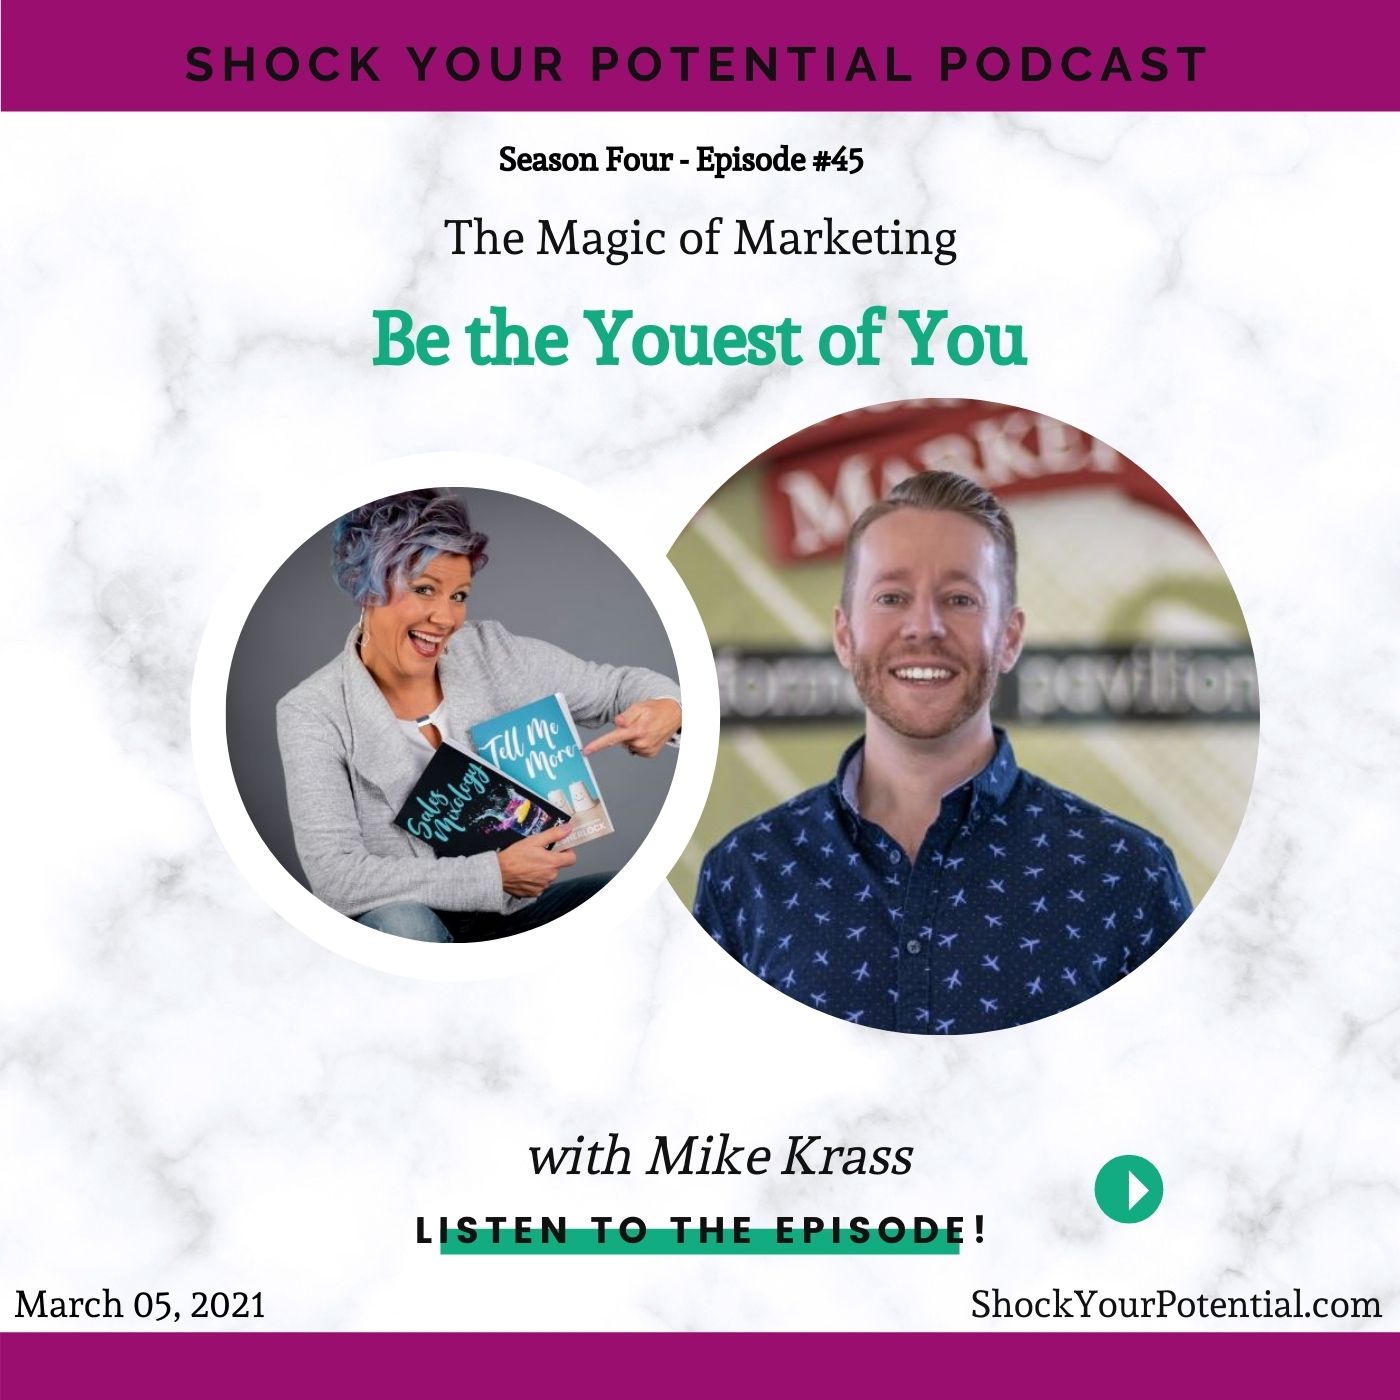 Be the Youest of You – Mike Krass